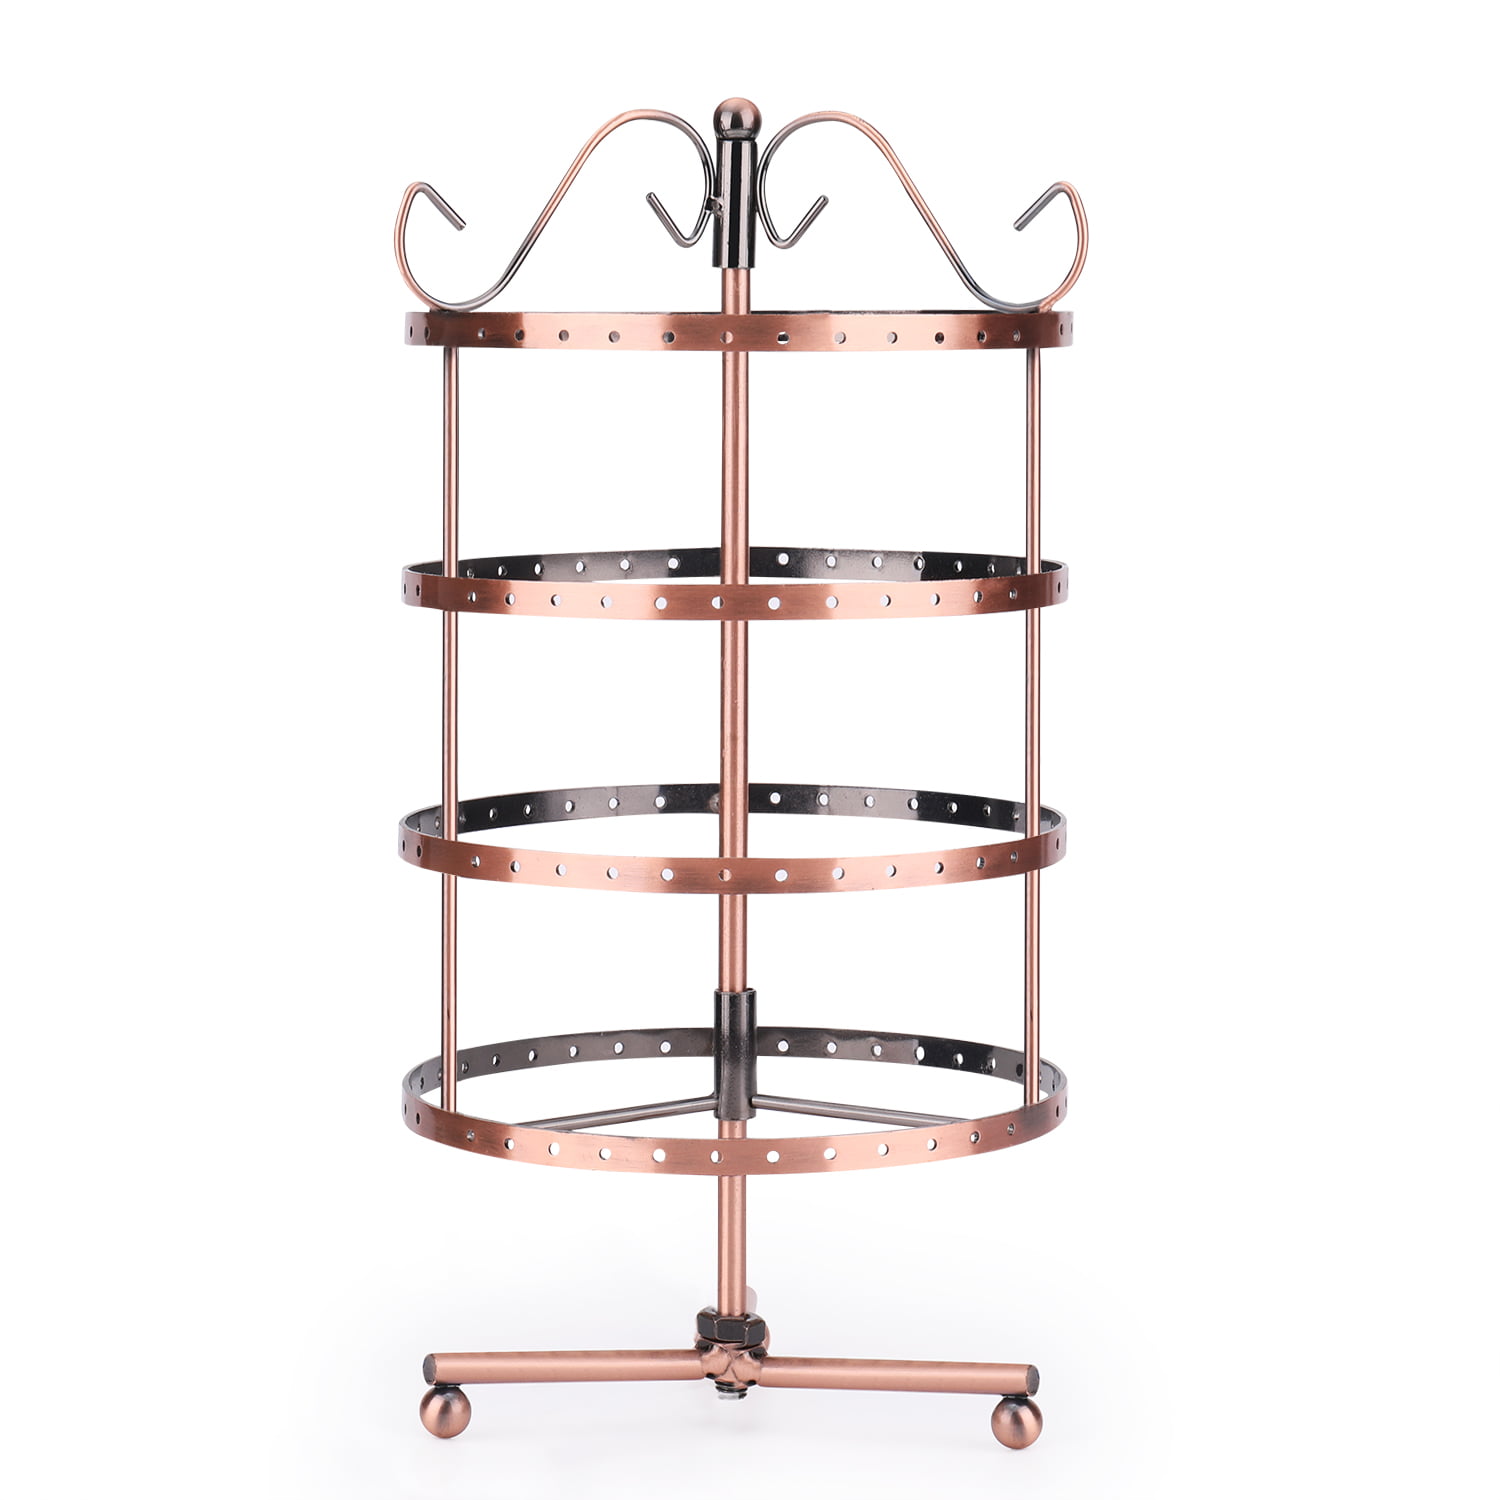 Jewelry Rotating Stand Display Organizer Necklace Ring Earring Holder Show Rack 